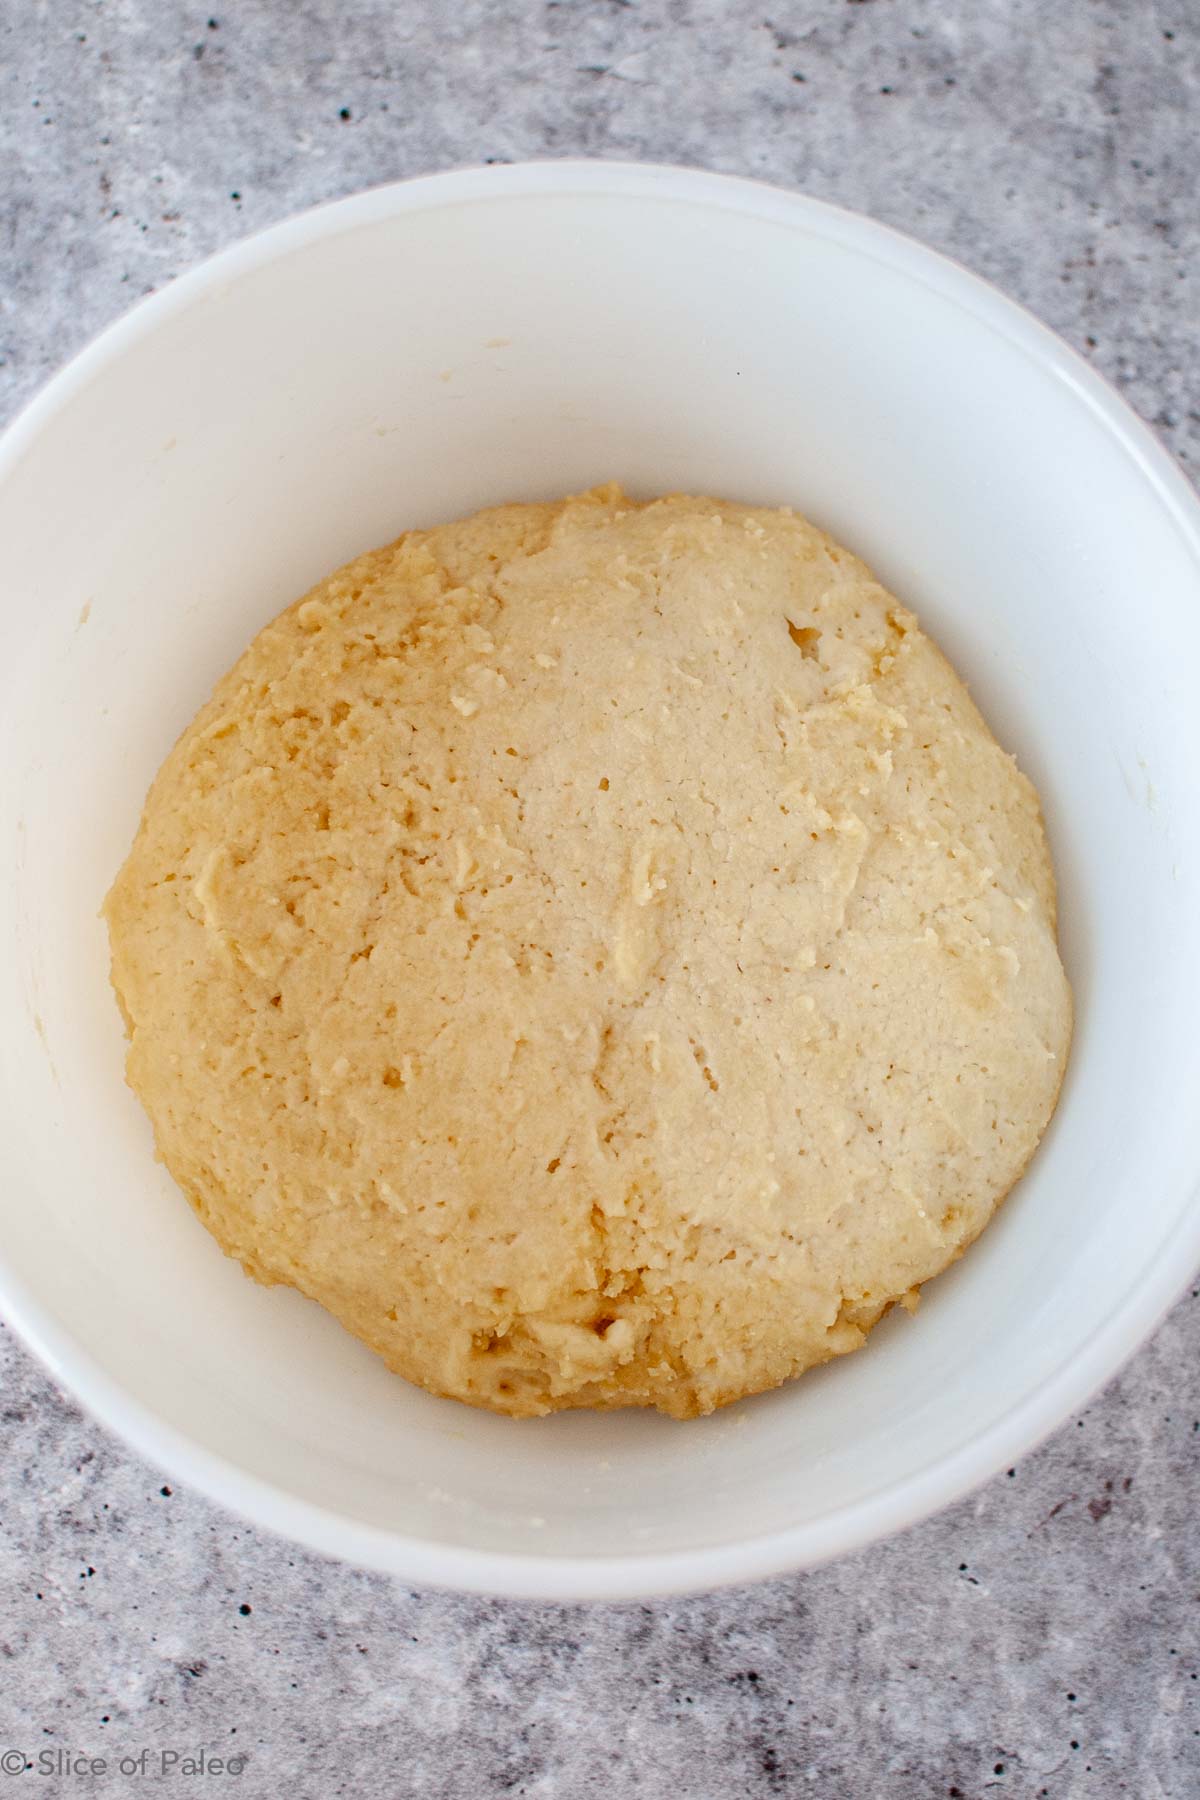 Paleo Chicago Style Deep Dish Pizza dough that has finished rising.